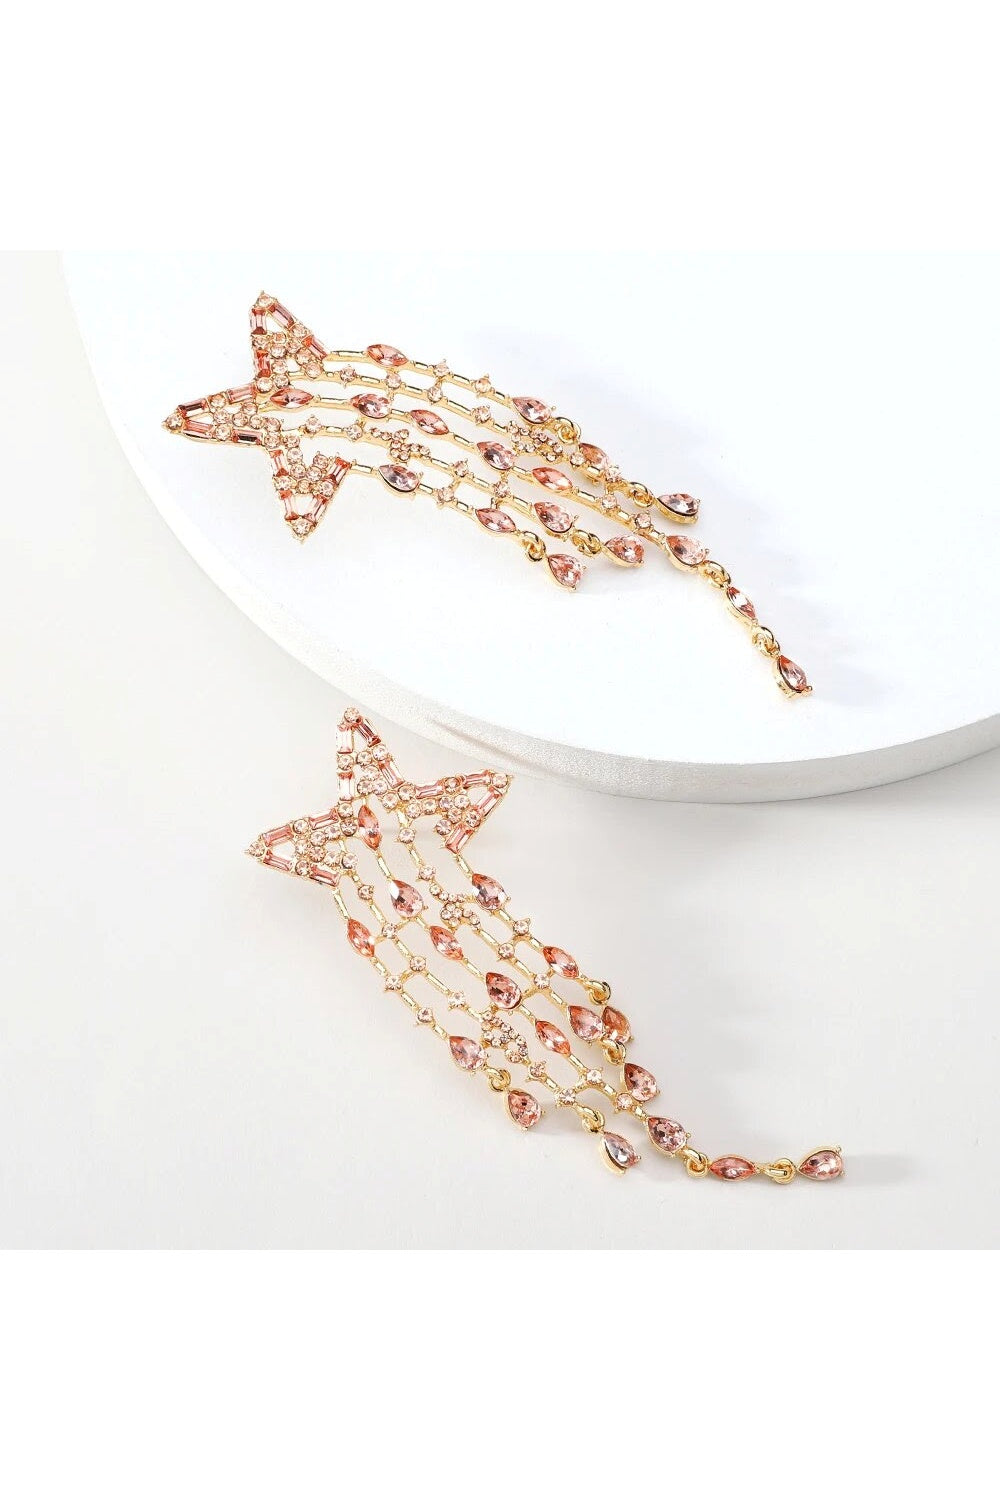 FALL FROM THE STARS EARRINGS CHAMPAGNE